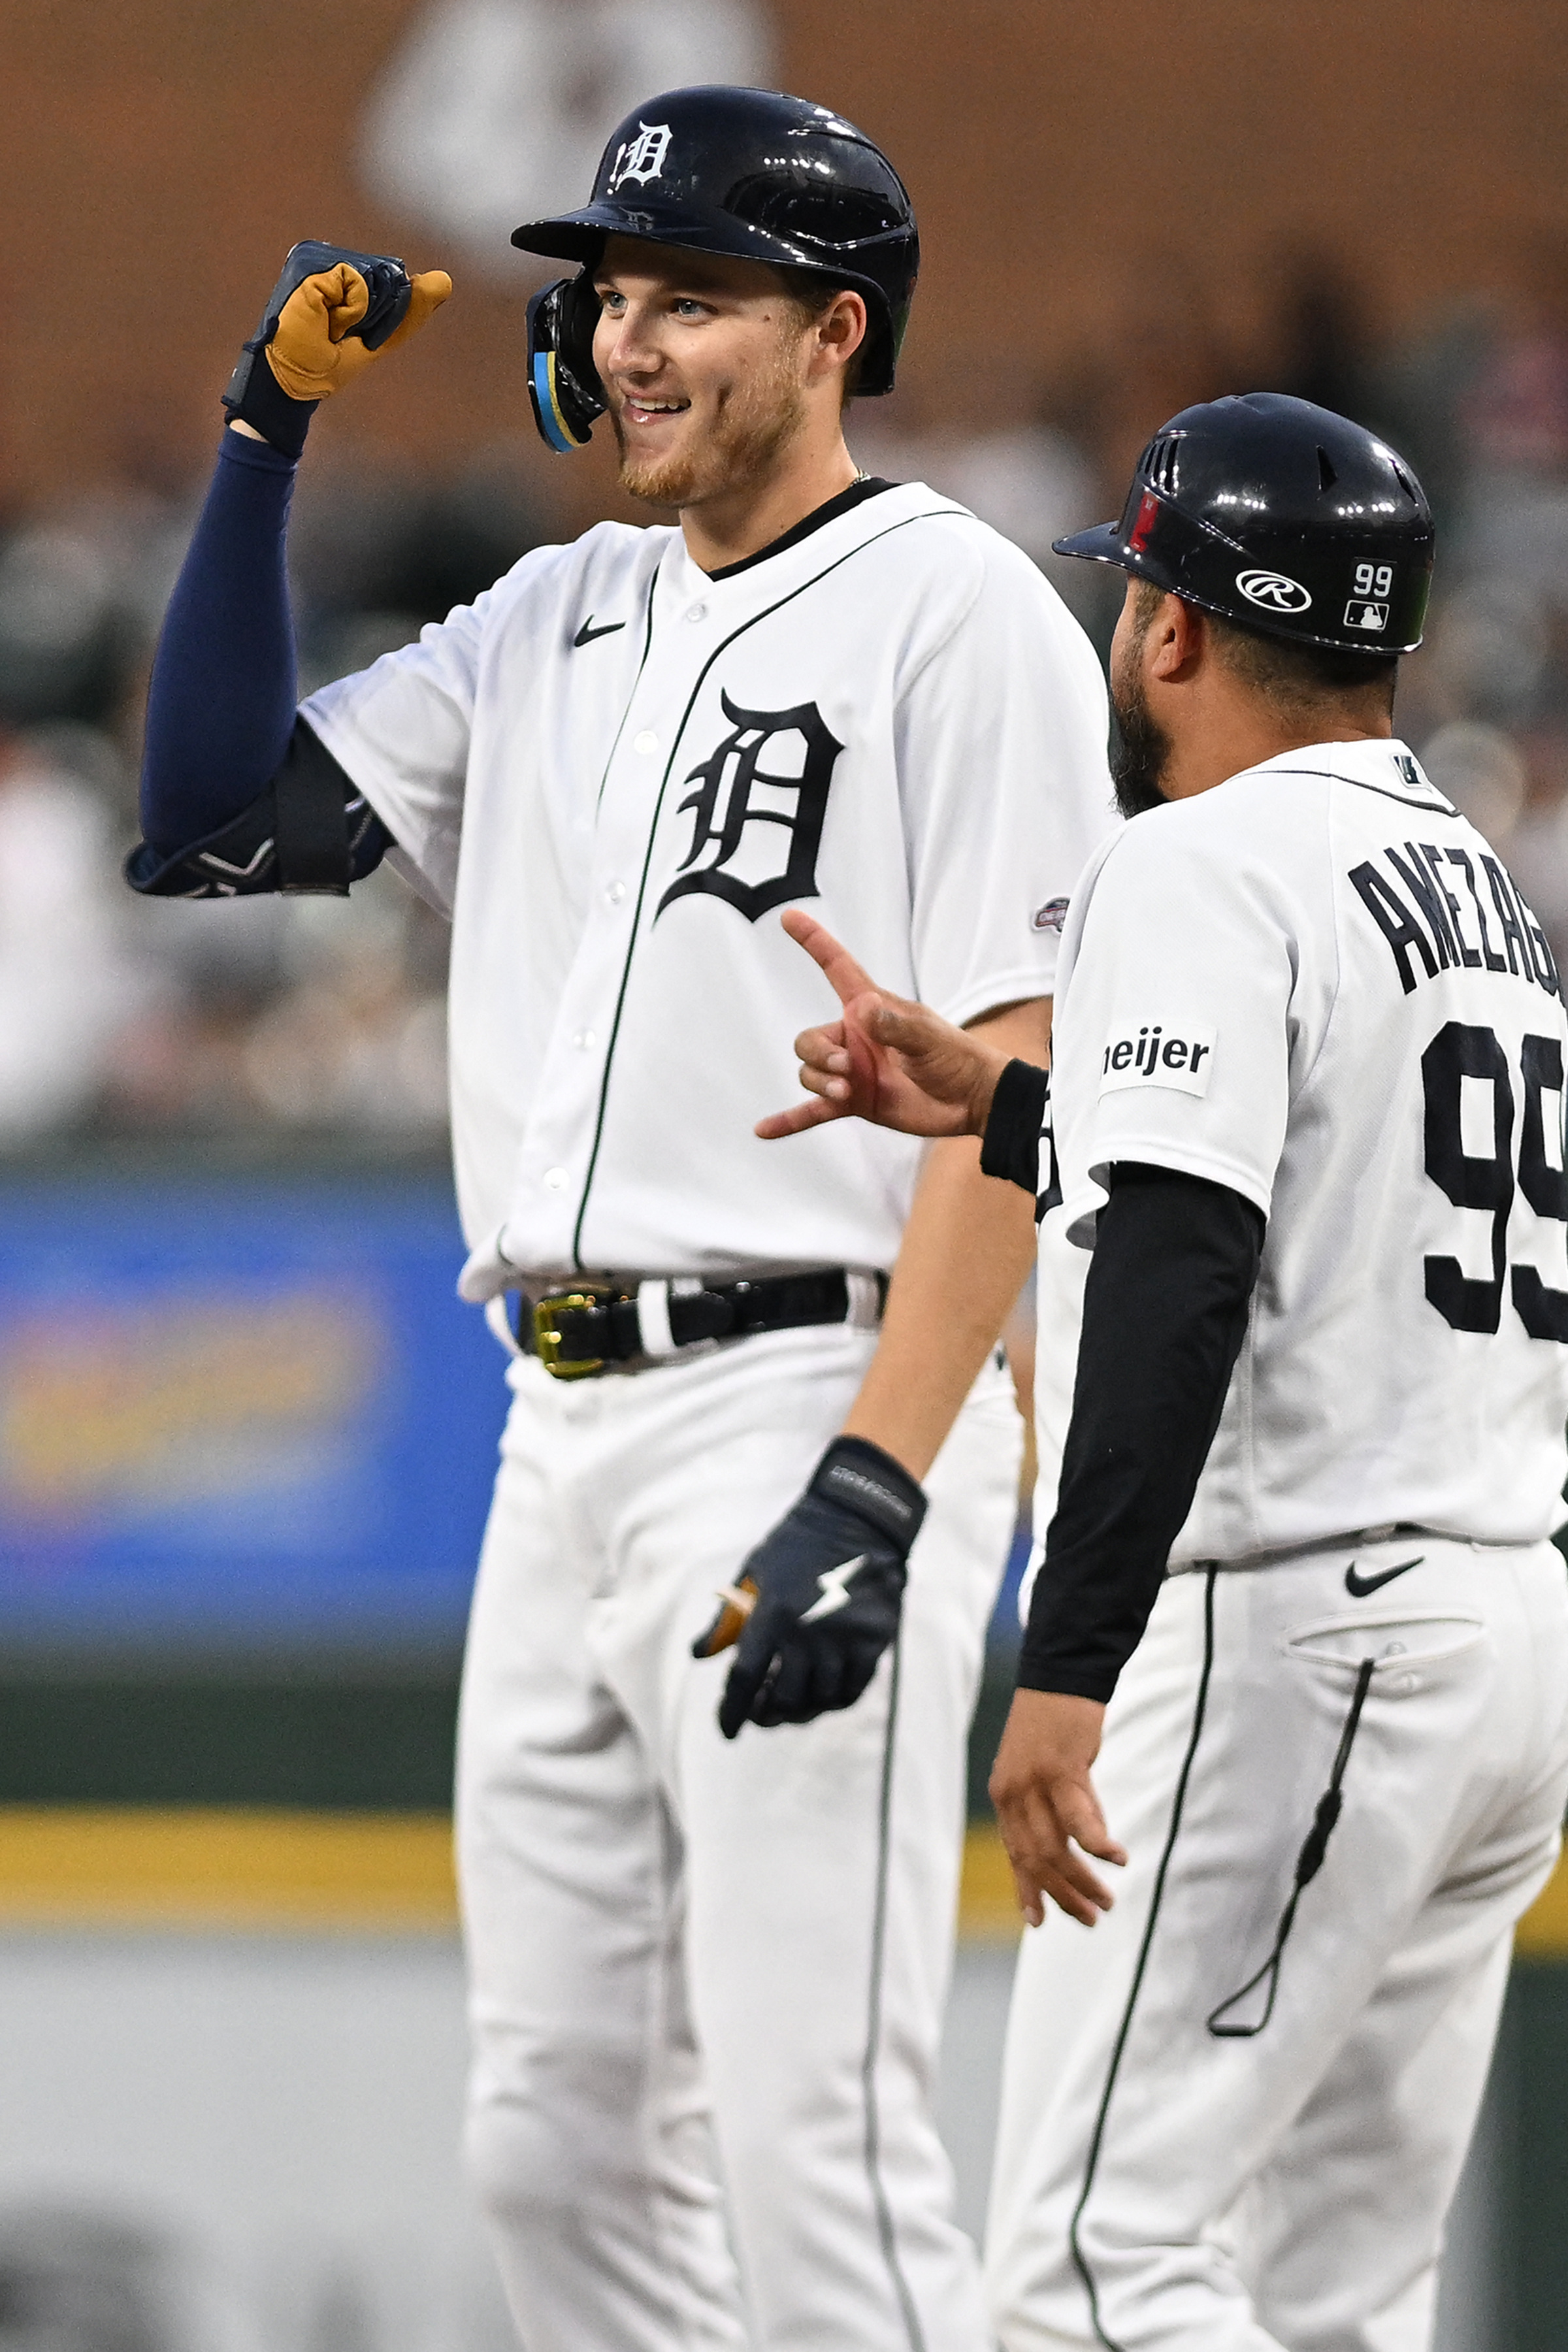 Andy Ibañez homers twice in Tigers victory over Cubs